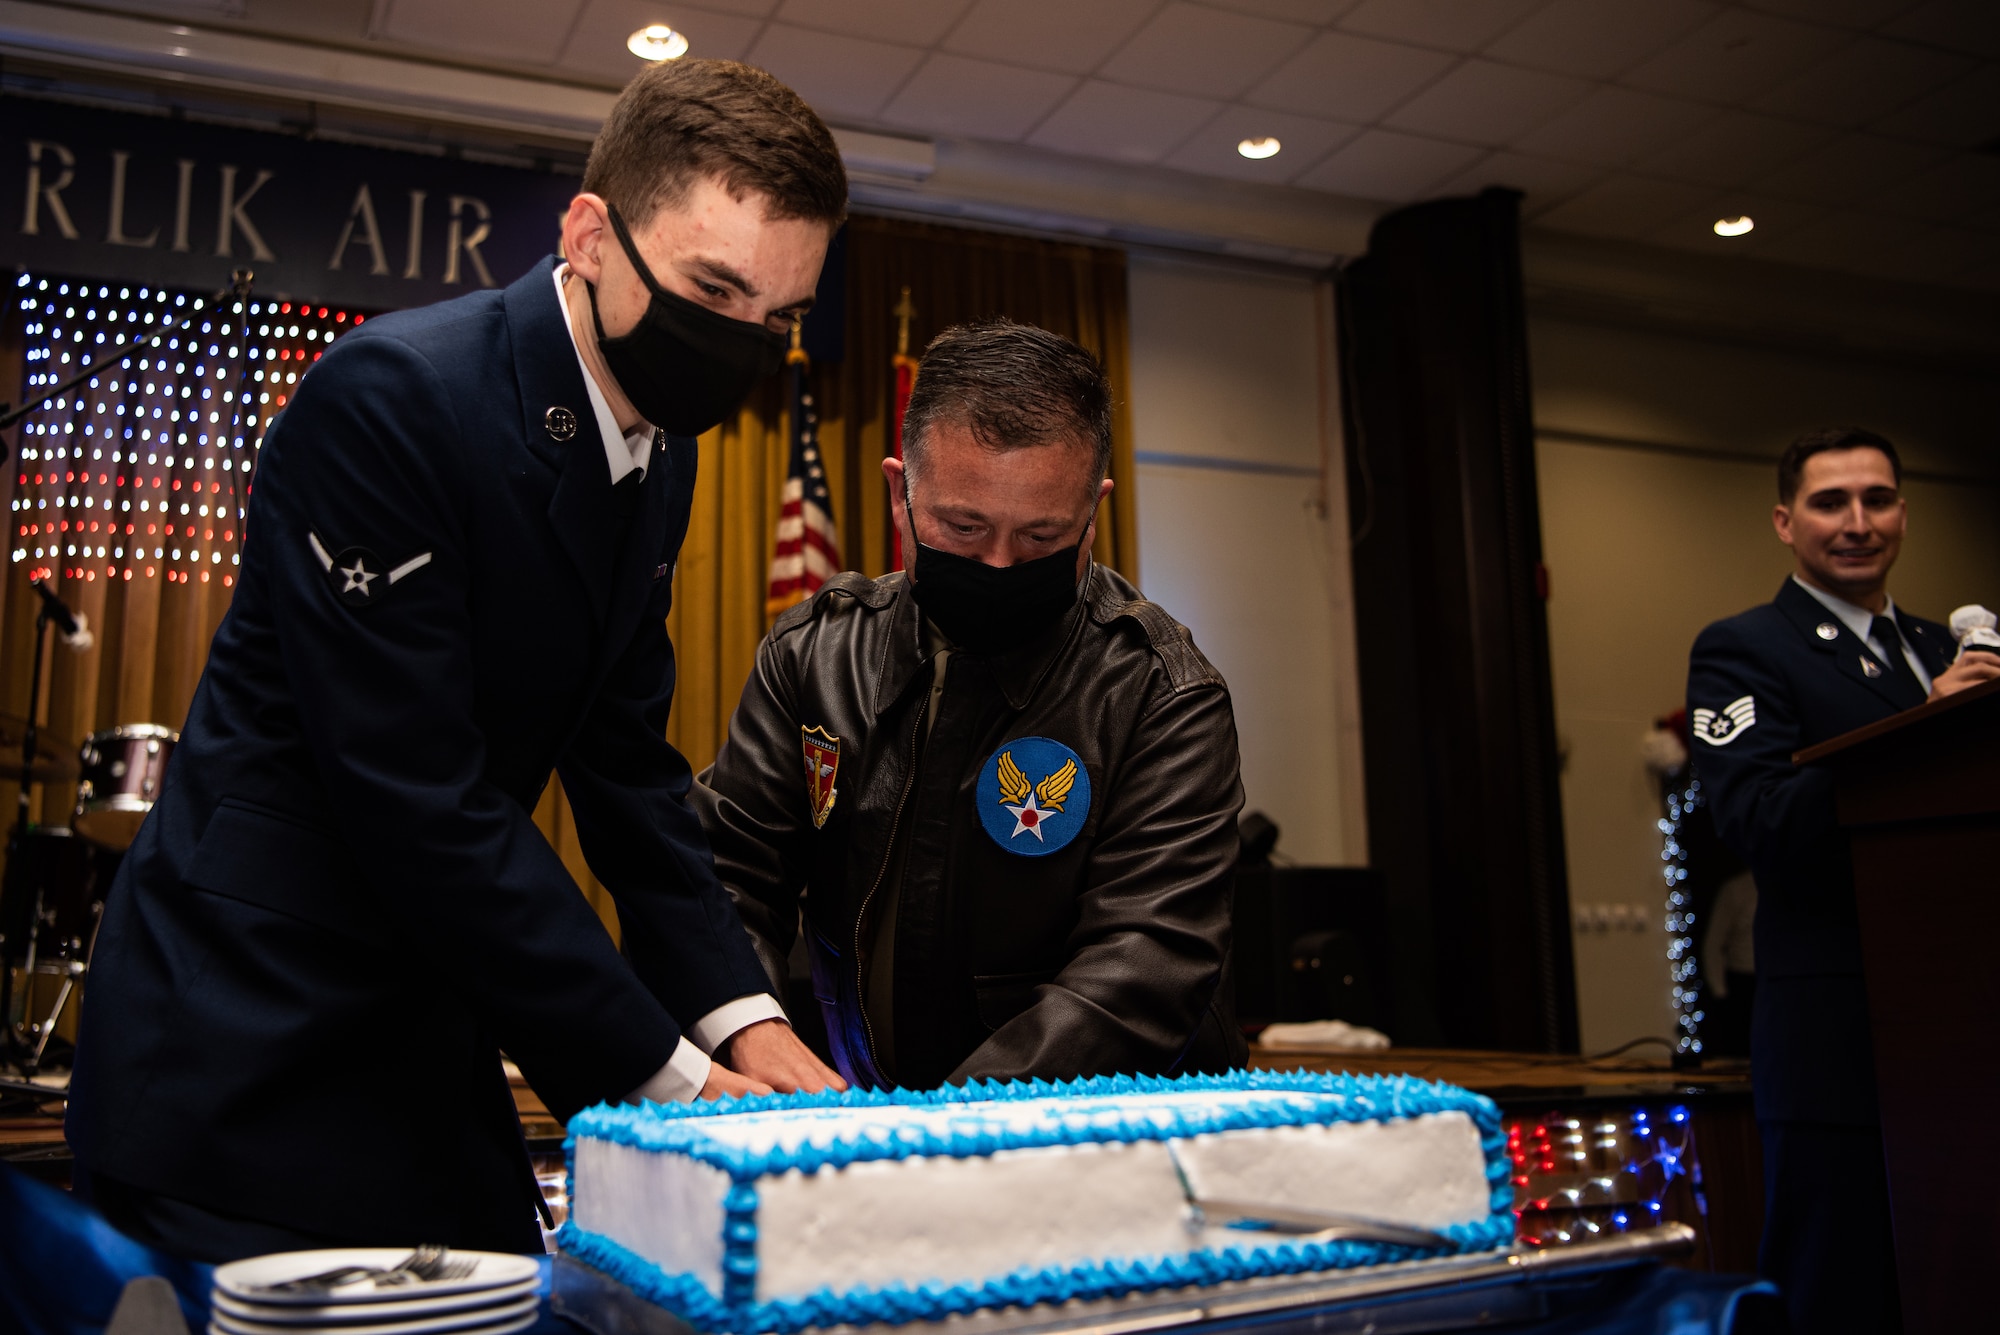 Airman and commander cutting a cake